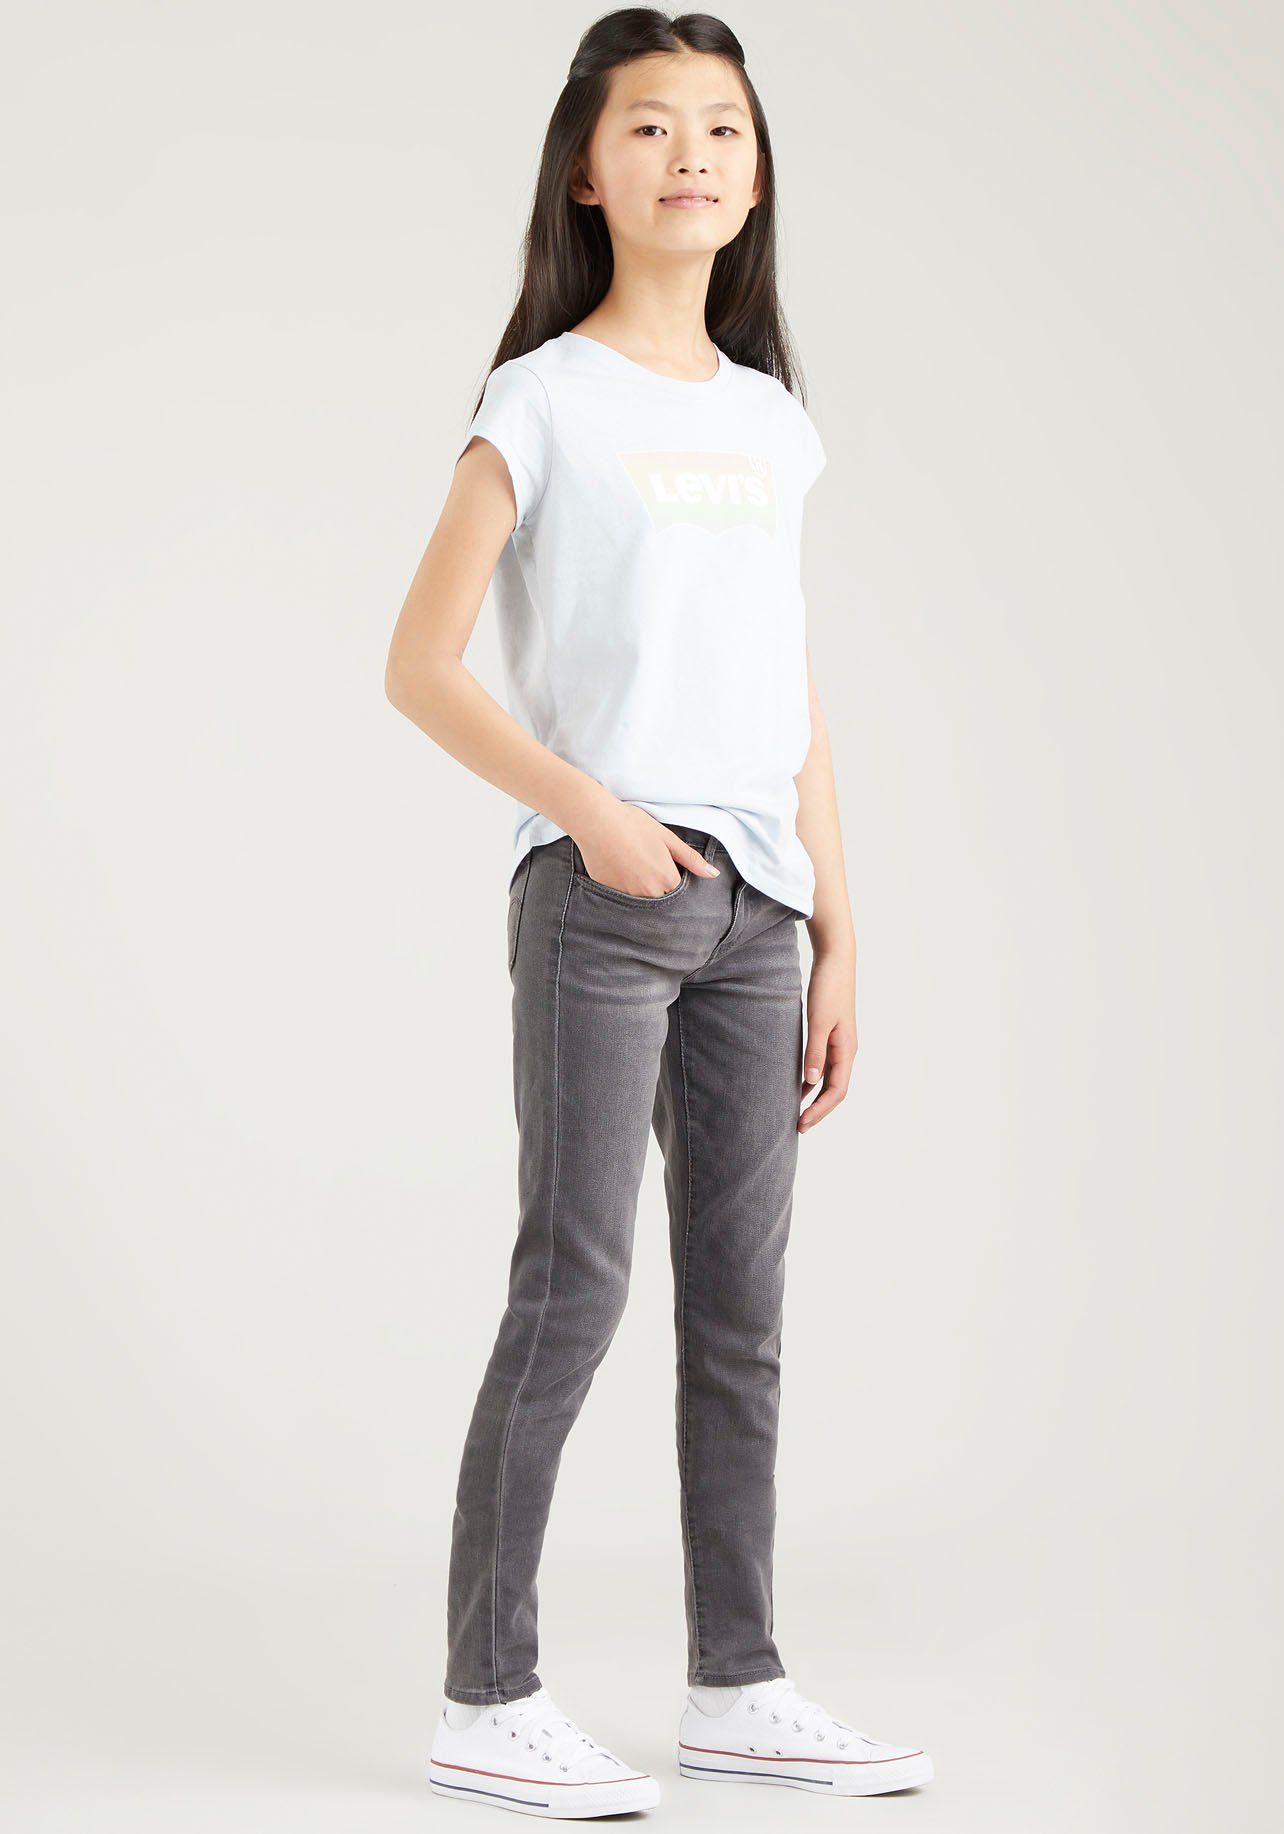 710™ baton SKINNY Stretch-Jeans JEANS Kids GIRLS Levi's® for FIT rouge SUPER